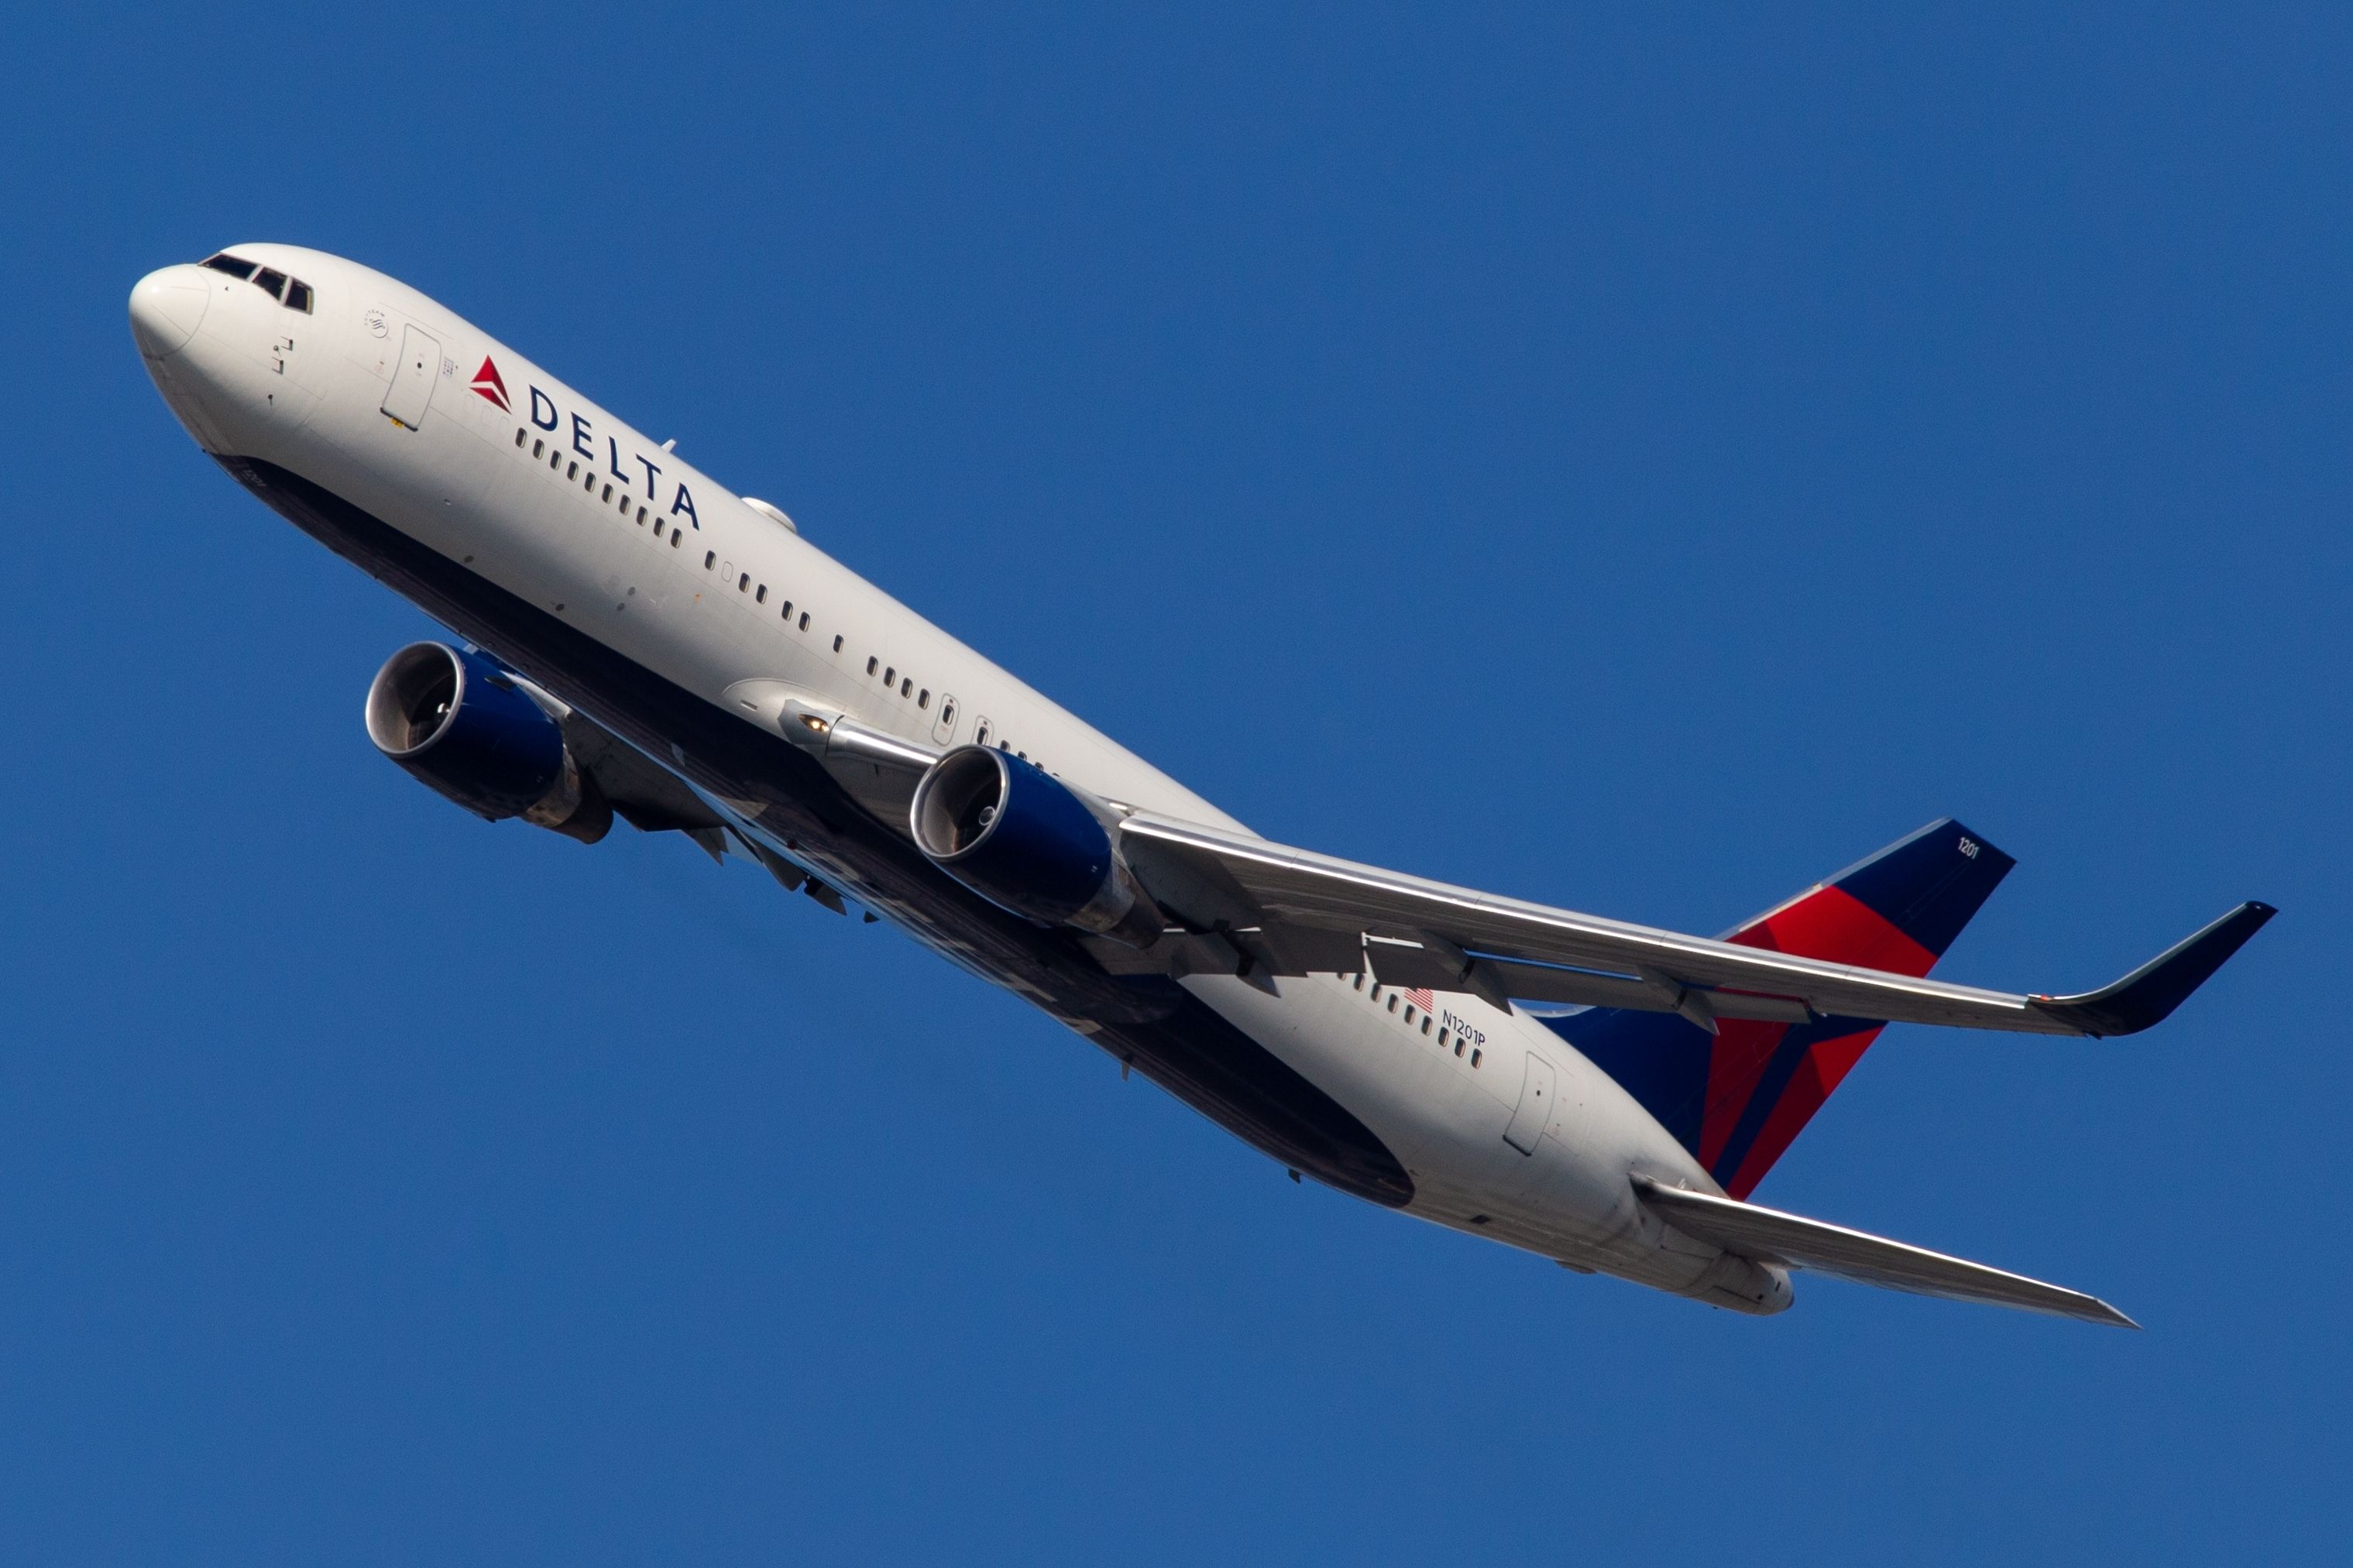 Delta Air Lines Boeing 767-300ER taking off from John F. Kennedy International Airport.